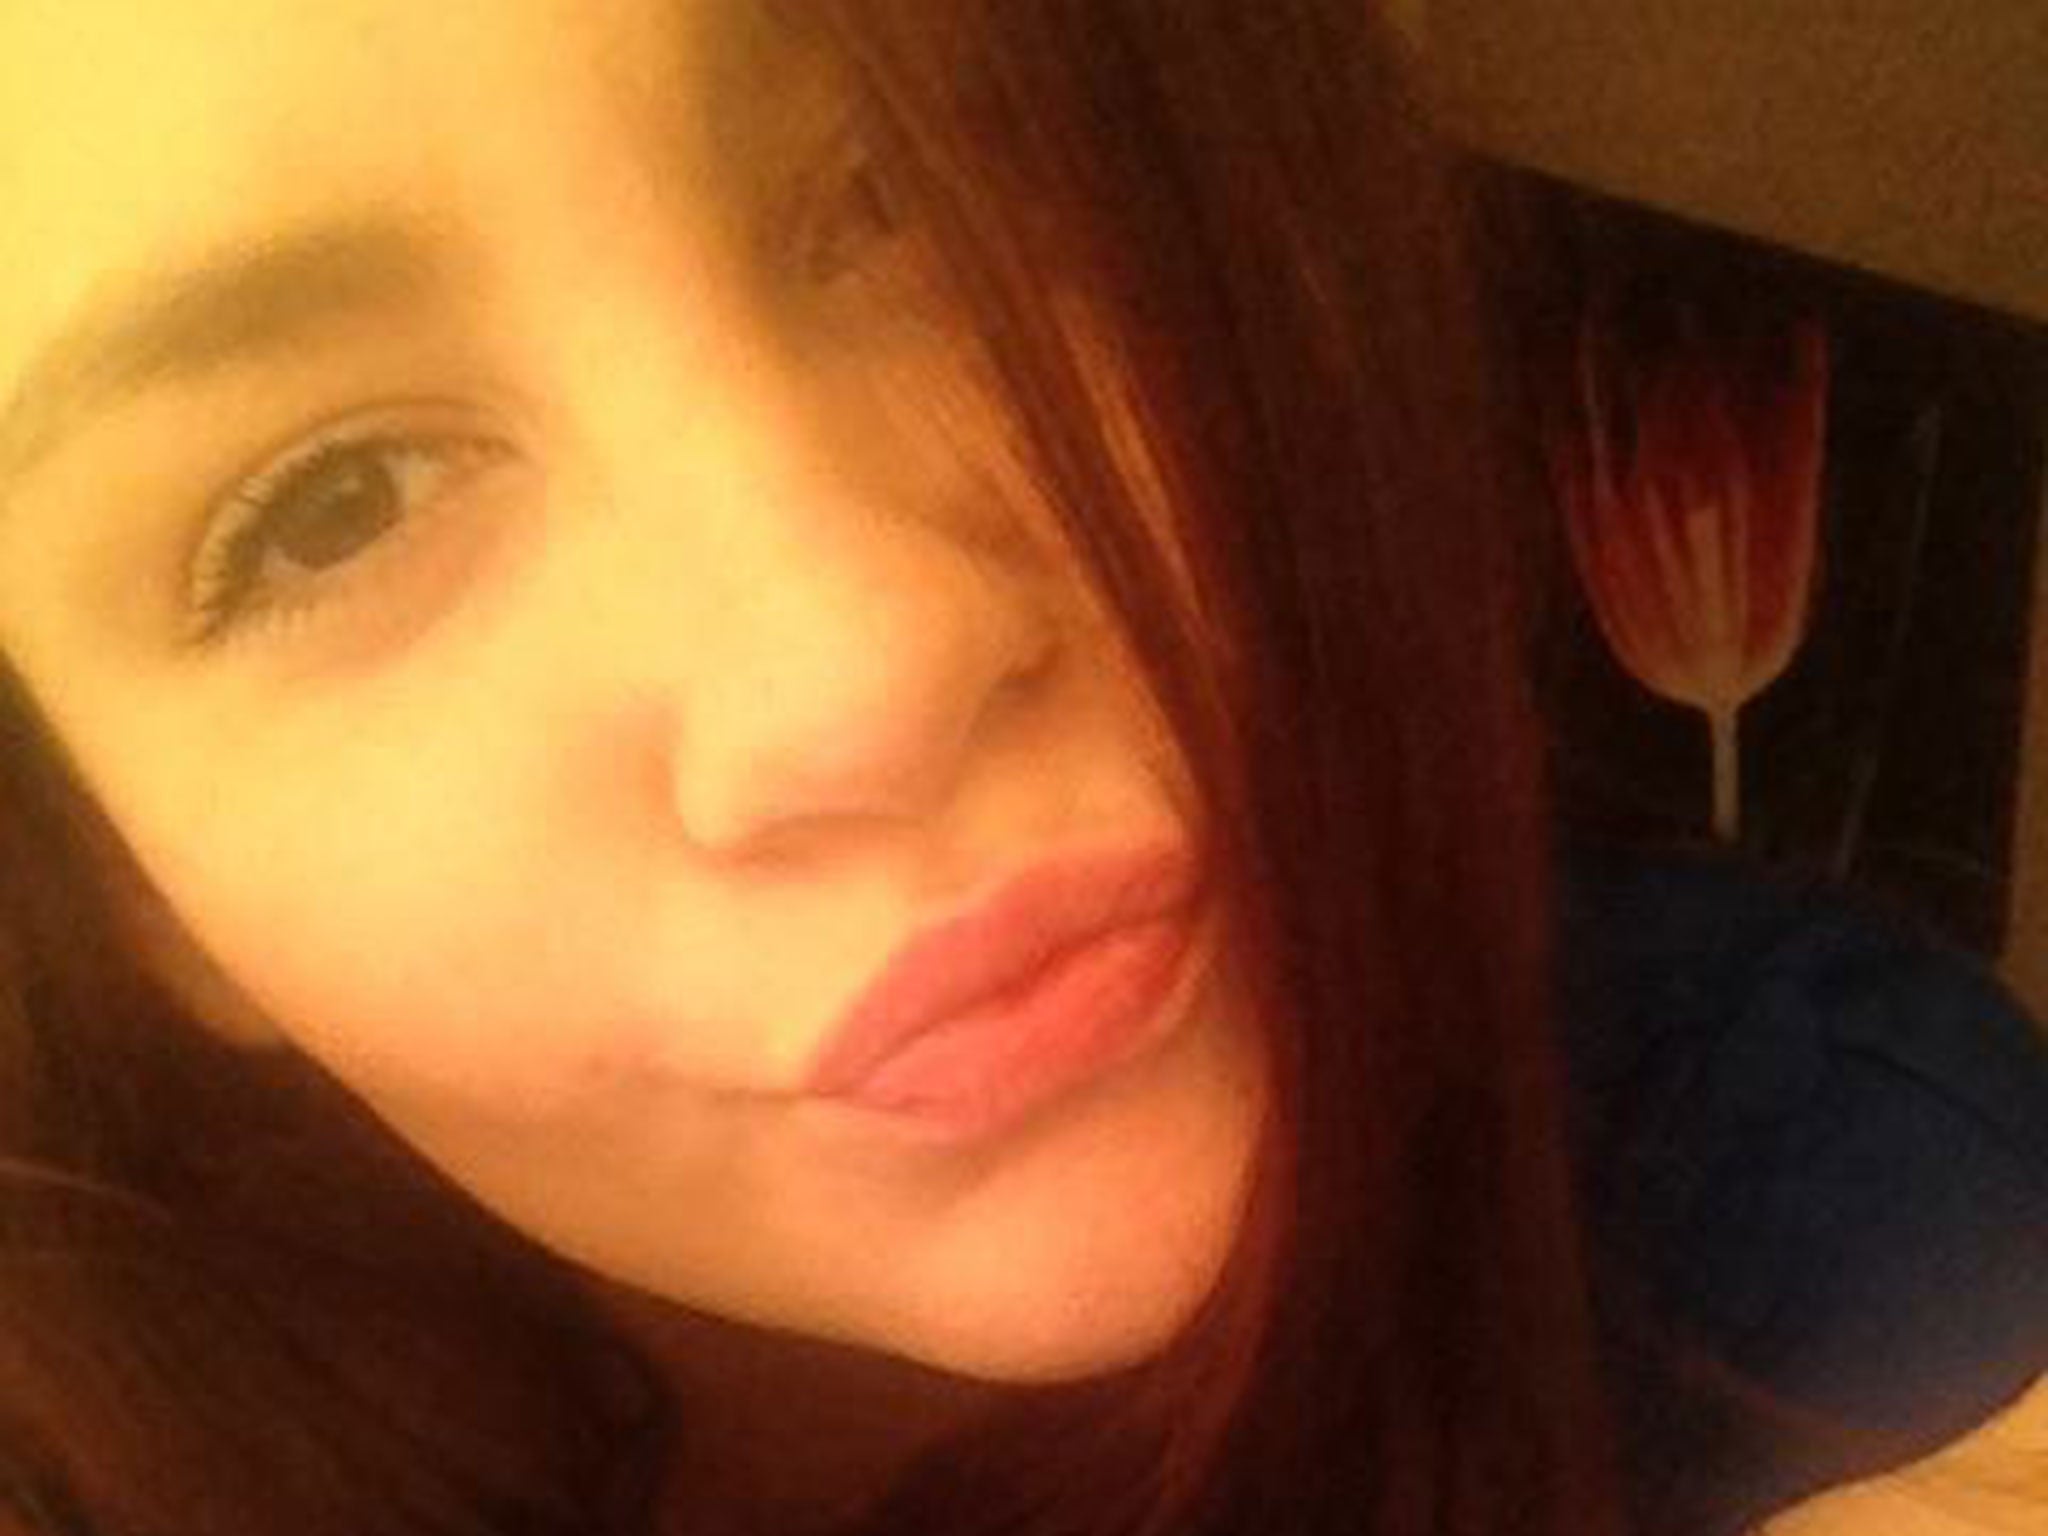 Faye Allen, 17, died after having an adverse reaction to an ecstasy pill known as 'MasterCard'